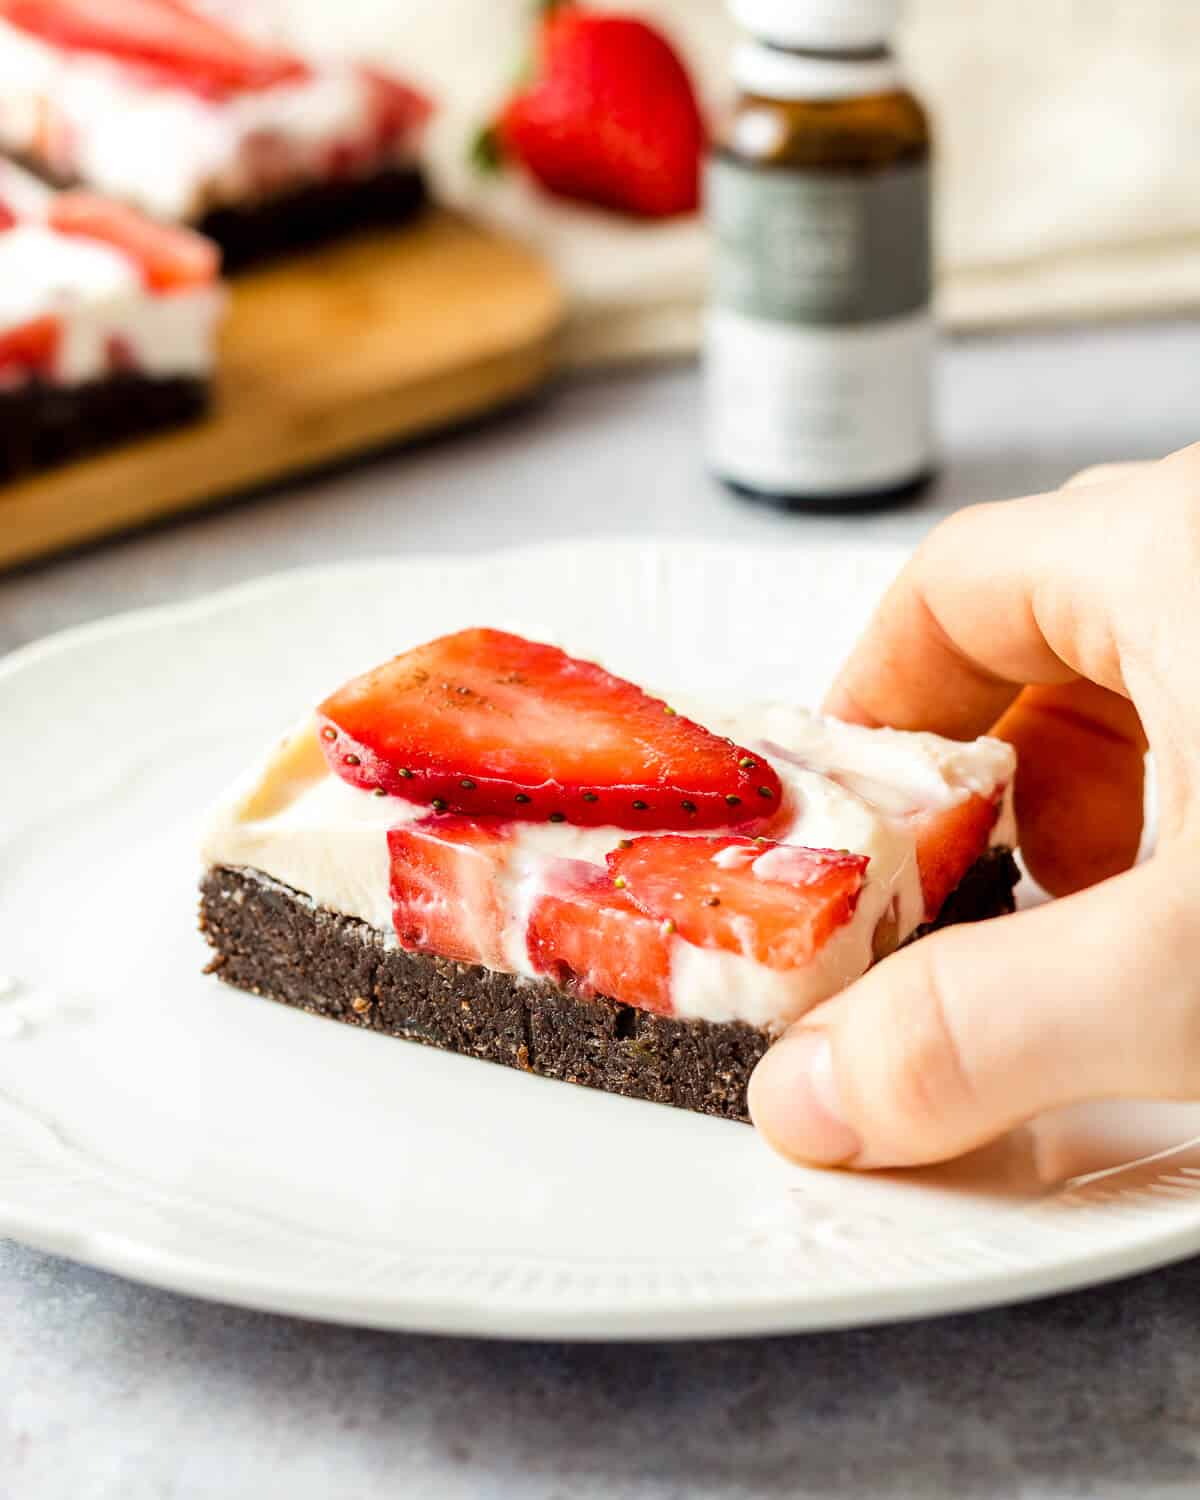 A hand is holding a no bake cheesecake brownie with strawberries on a white plate. There are more brownies in the background as well as a bottle of CBD oil.